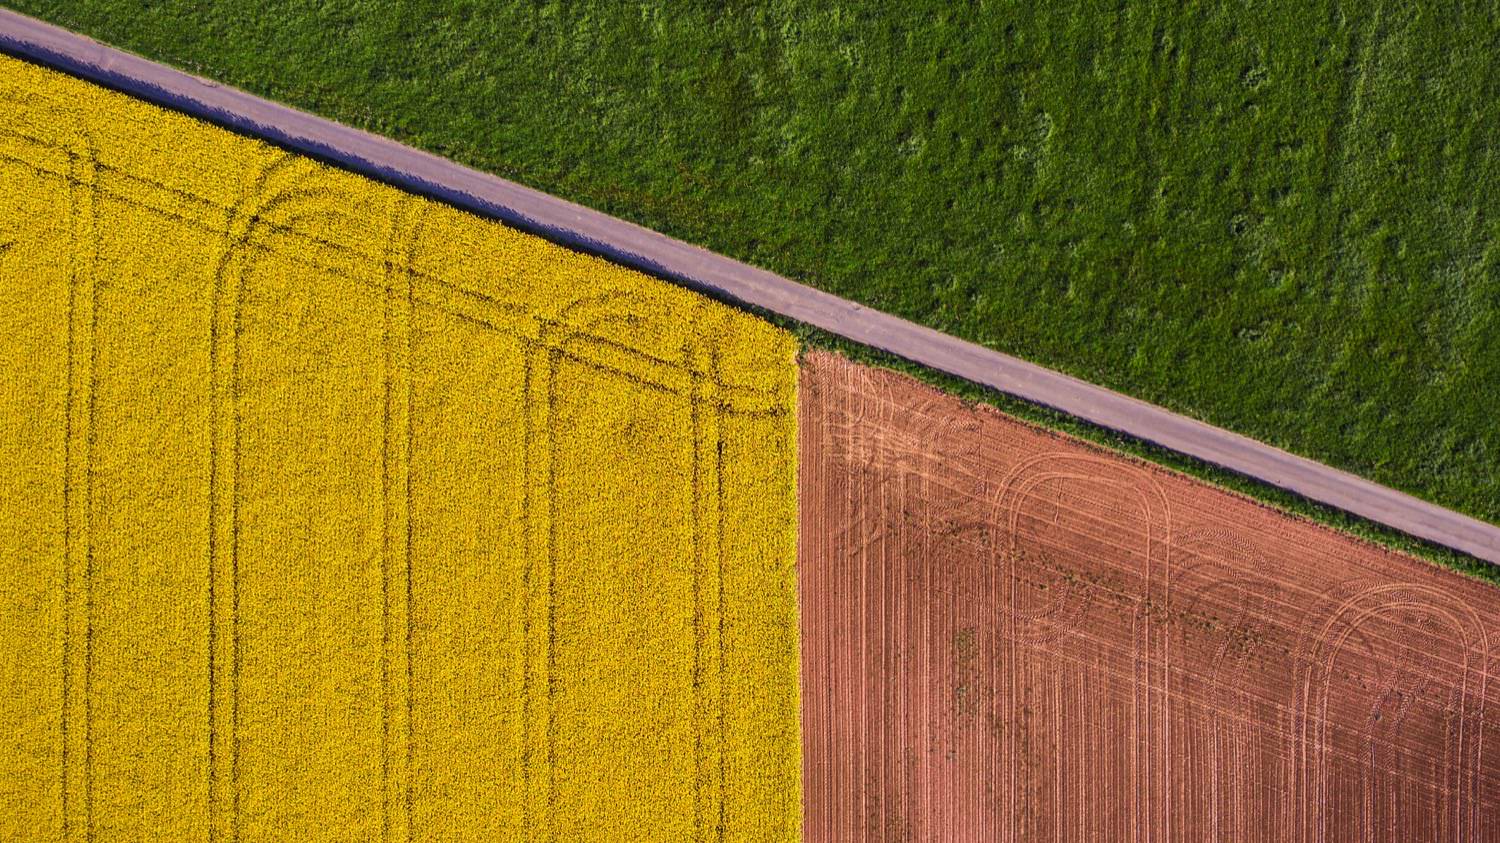 Agricultural fields have some fantastic lines.